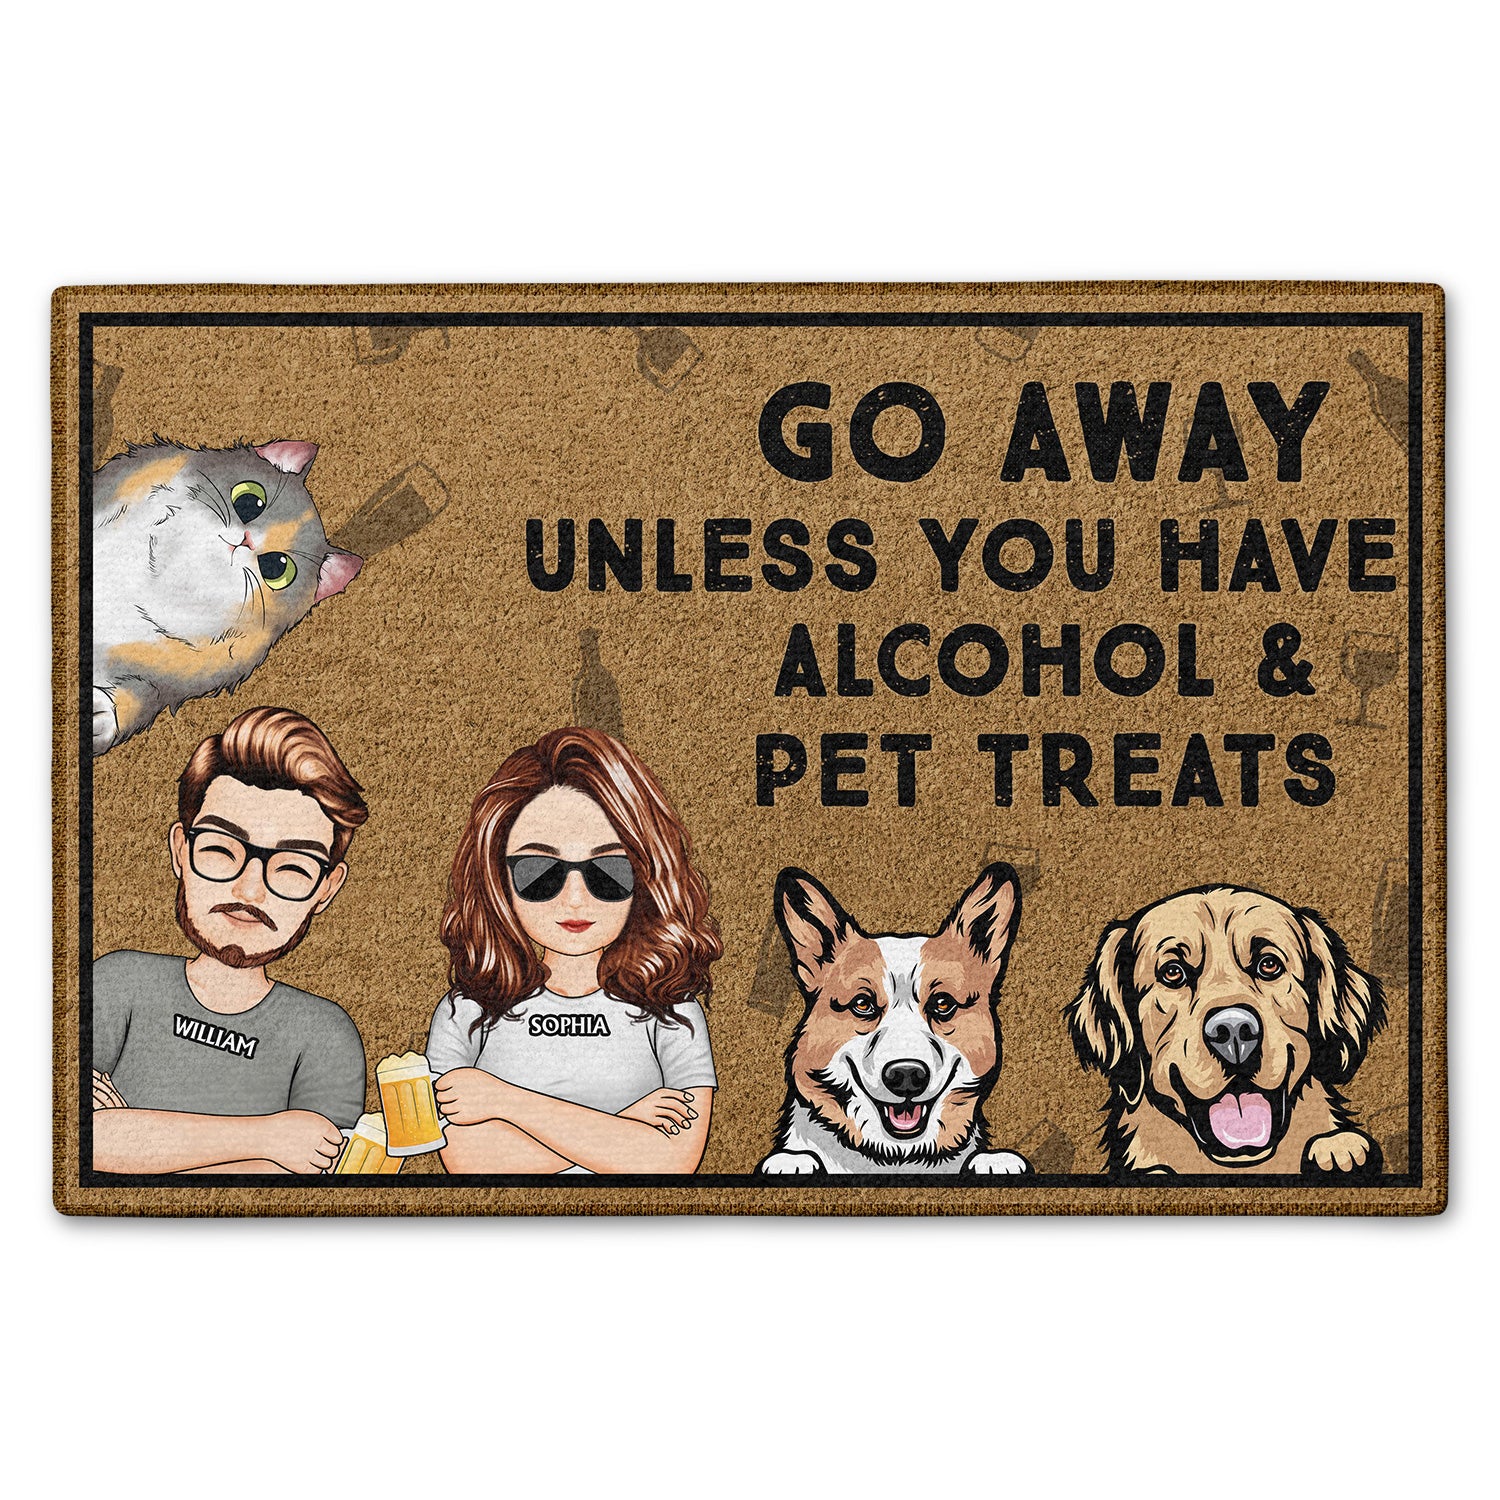 Go Away Unless You Have Alcohol And Dog Treats Cat Treats Pet Treats Cartoon Couples - Home Decor, Birthday, Housewarming Gift For Dog Lovers & Cat Lovers - Personalized Custom Doormat